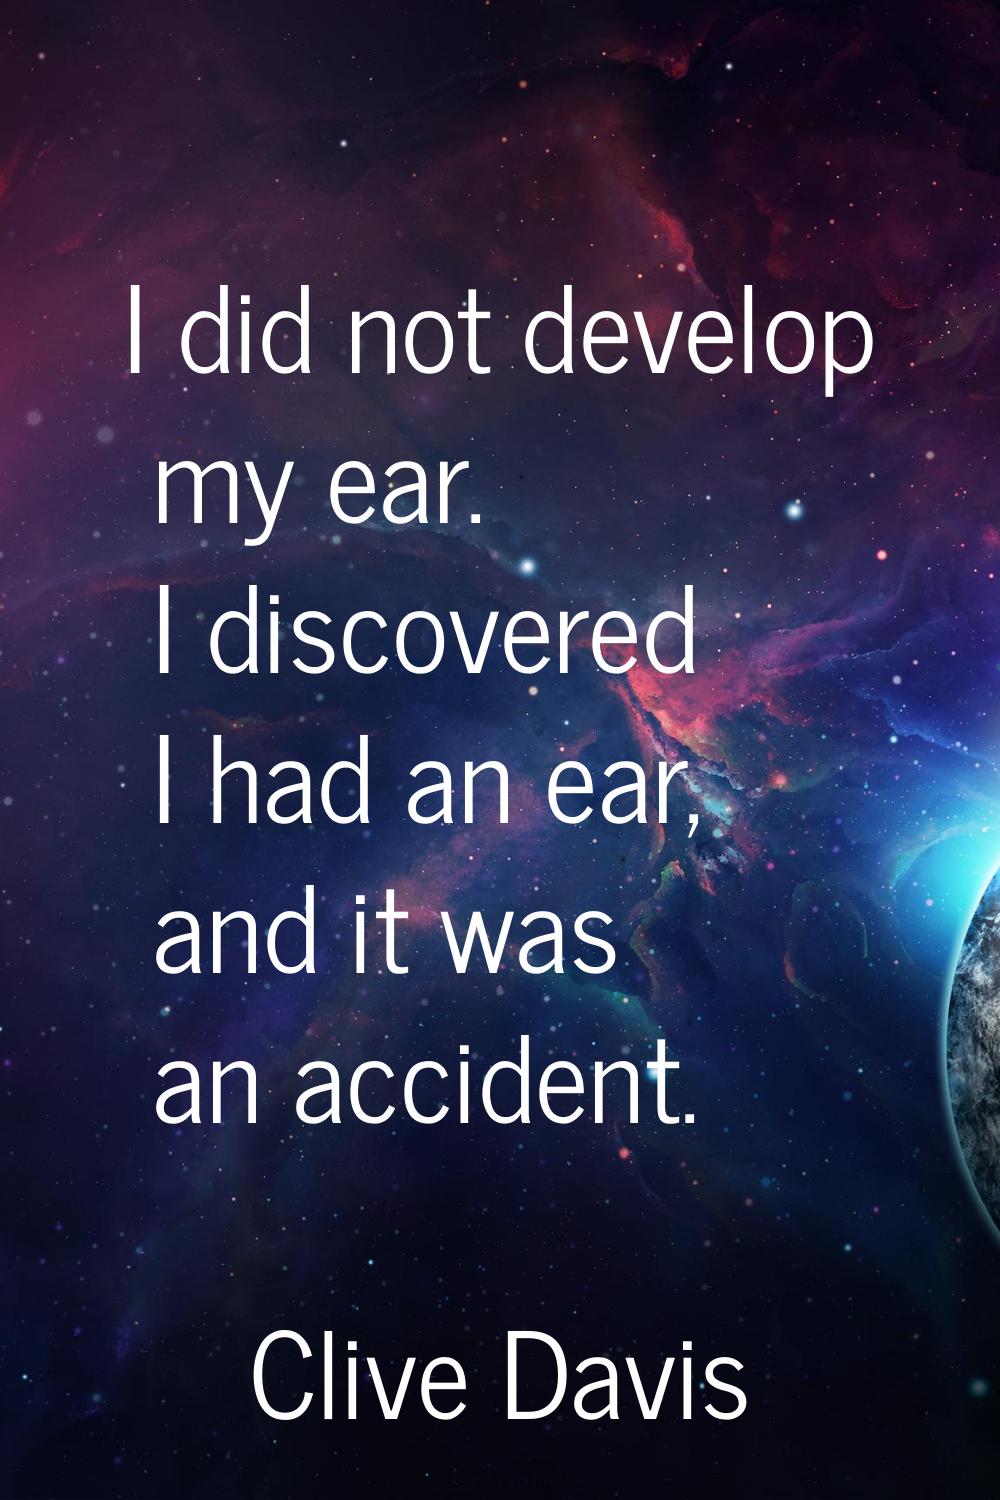 I did not develop my ear. I discovered I had an ear, and it was an accident.